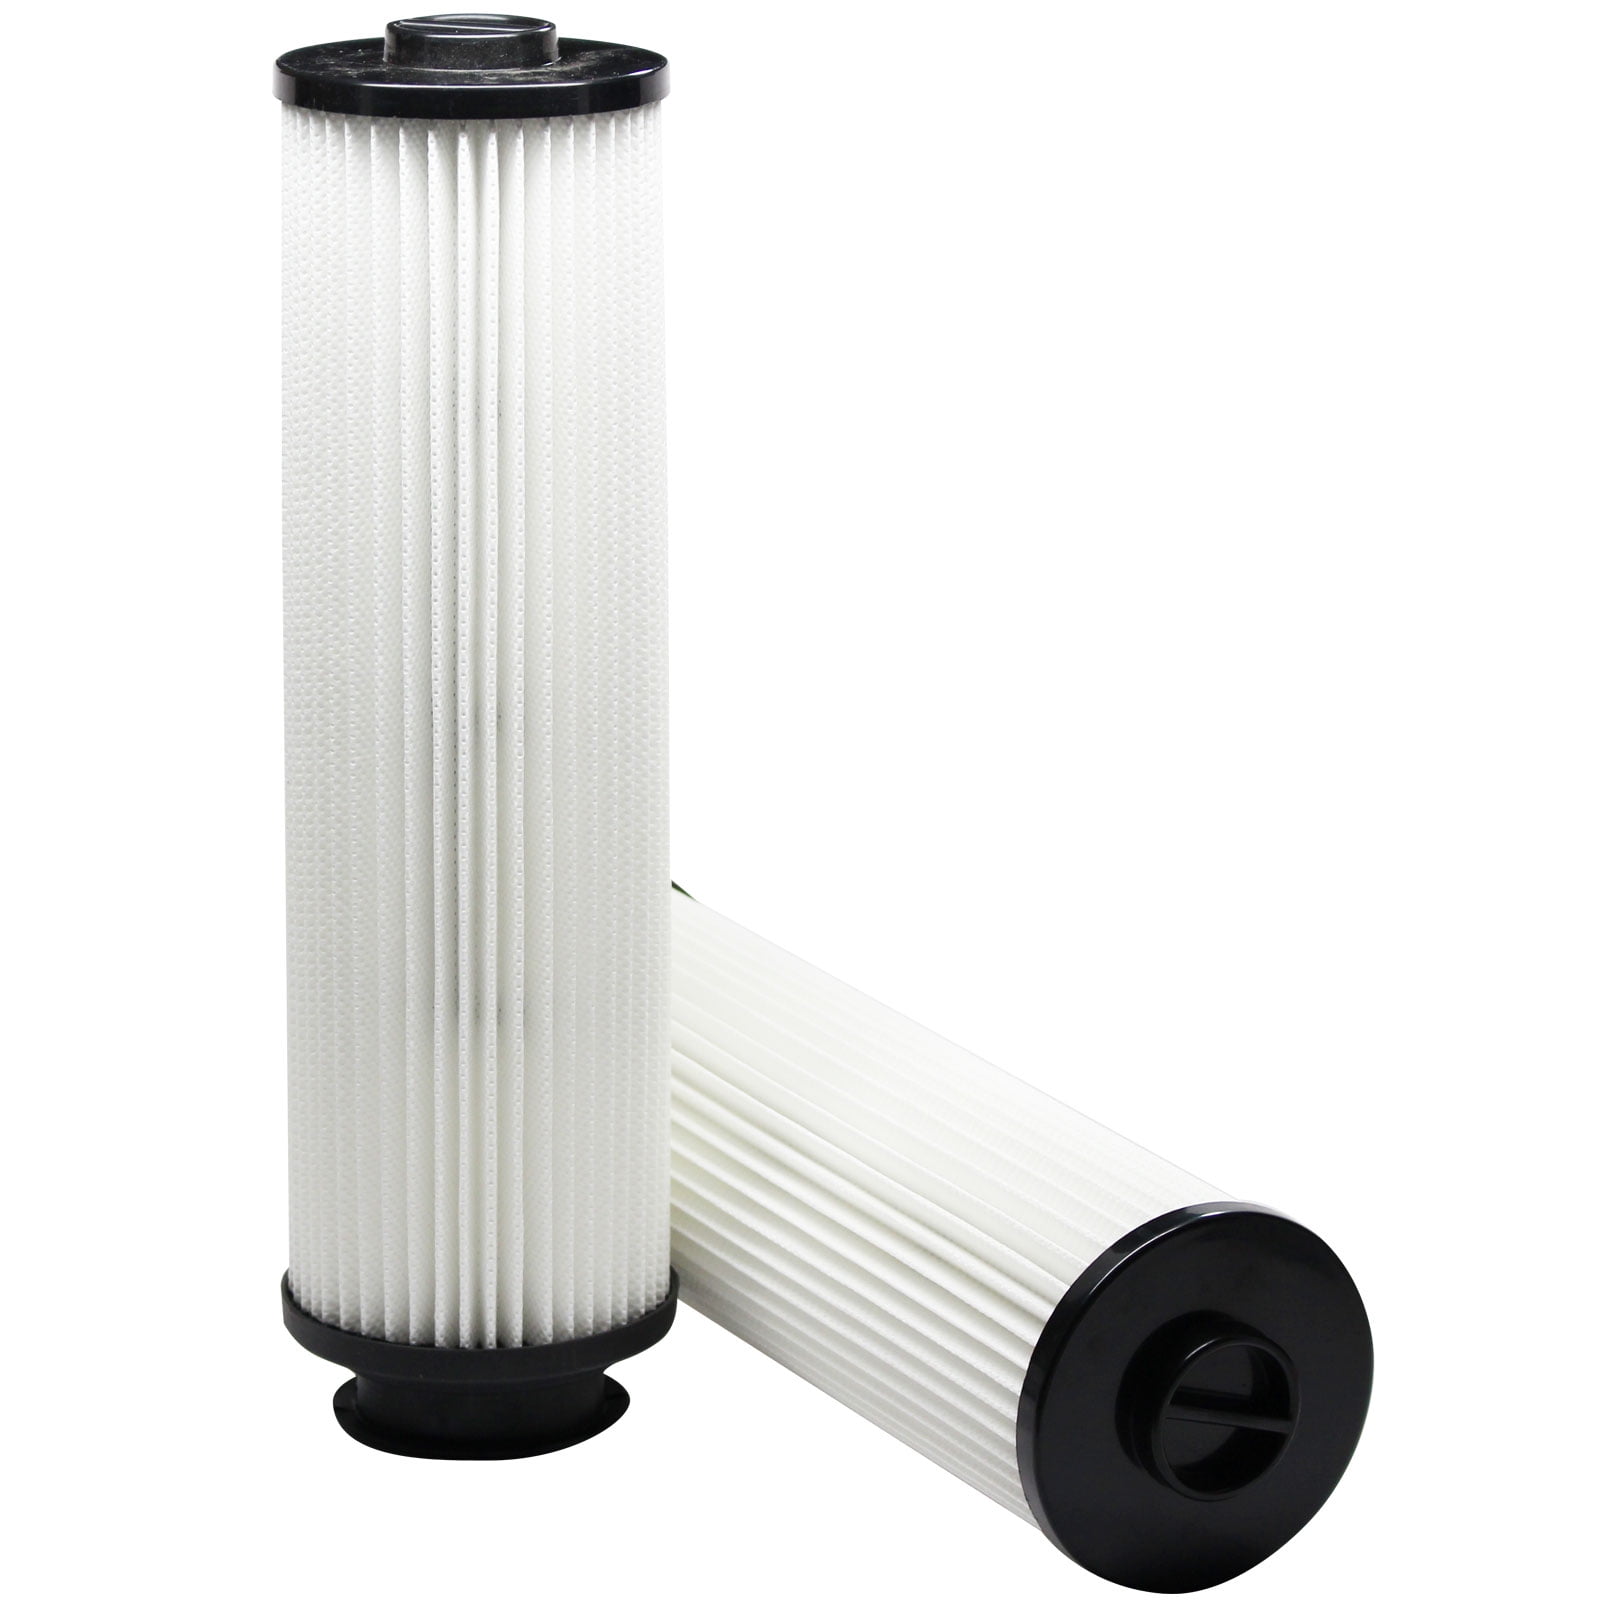 HEPA Filter for Hoover EmPower Turbo Series Bagless Upright Vacuum 40140201 